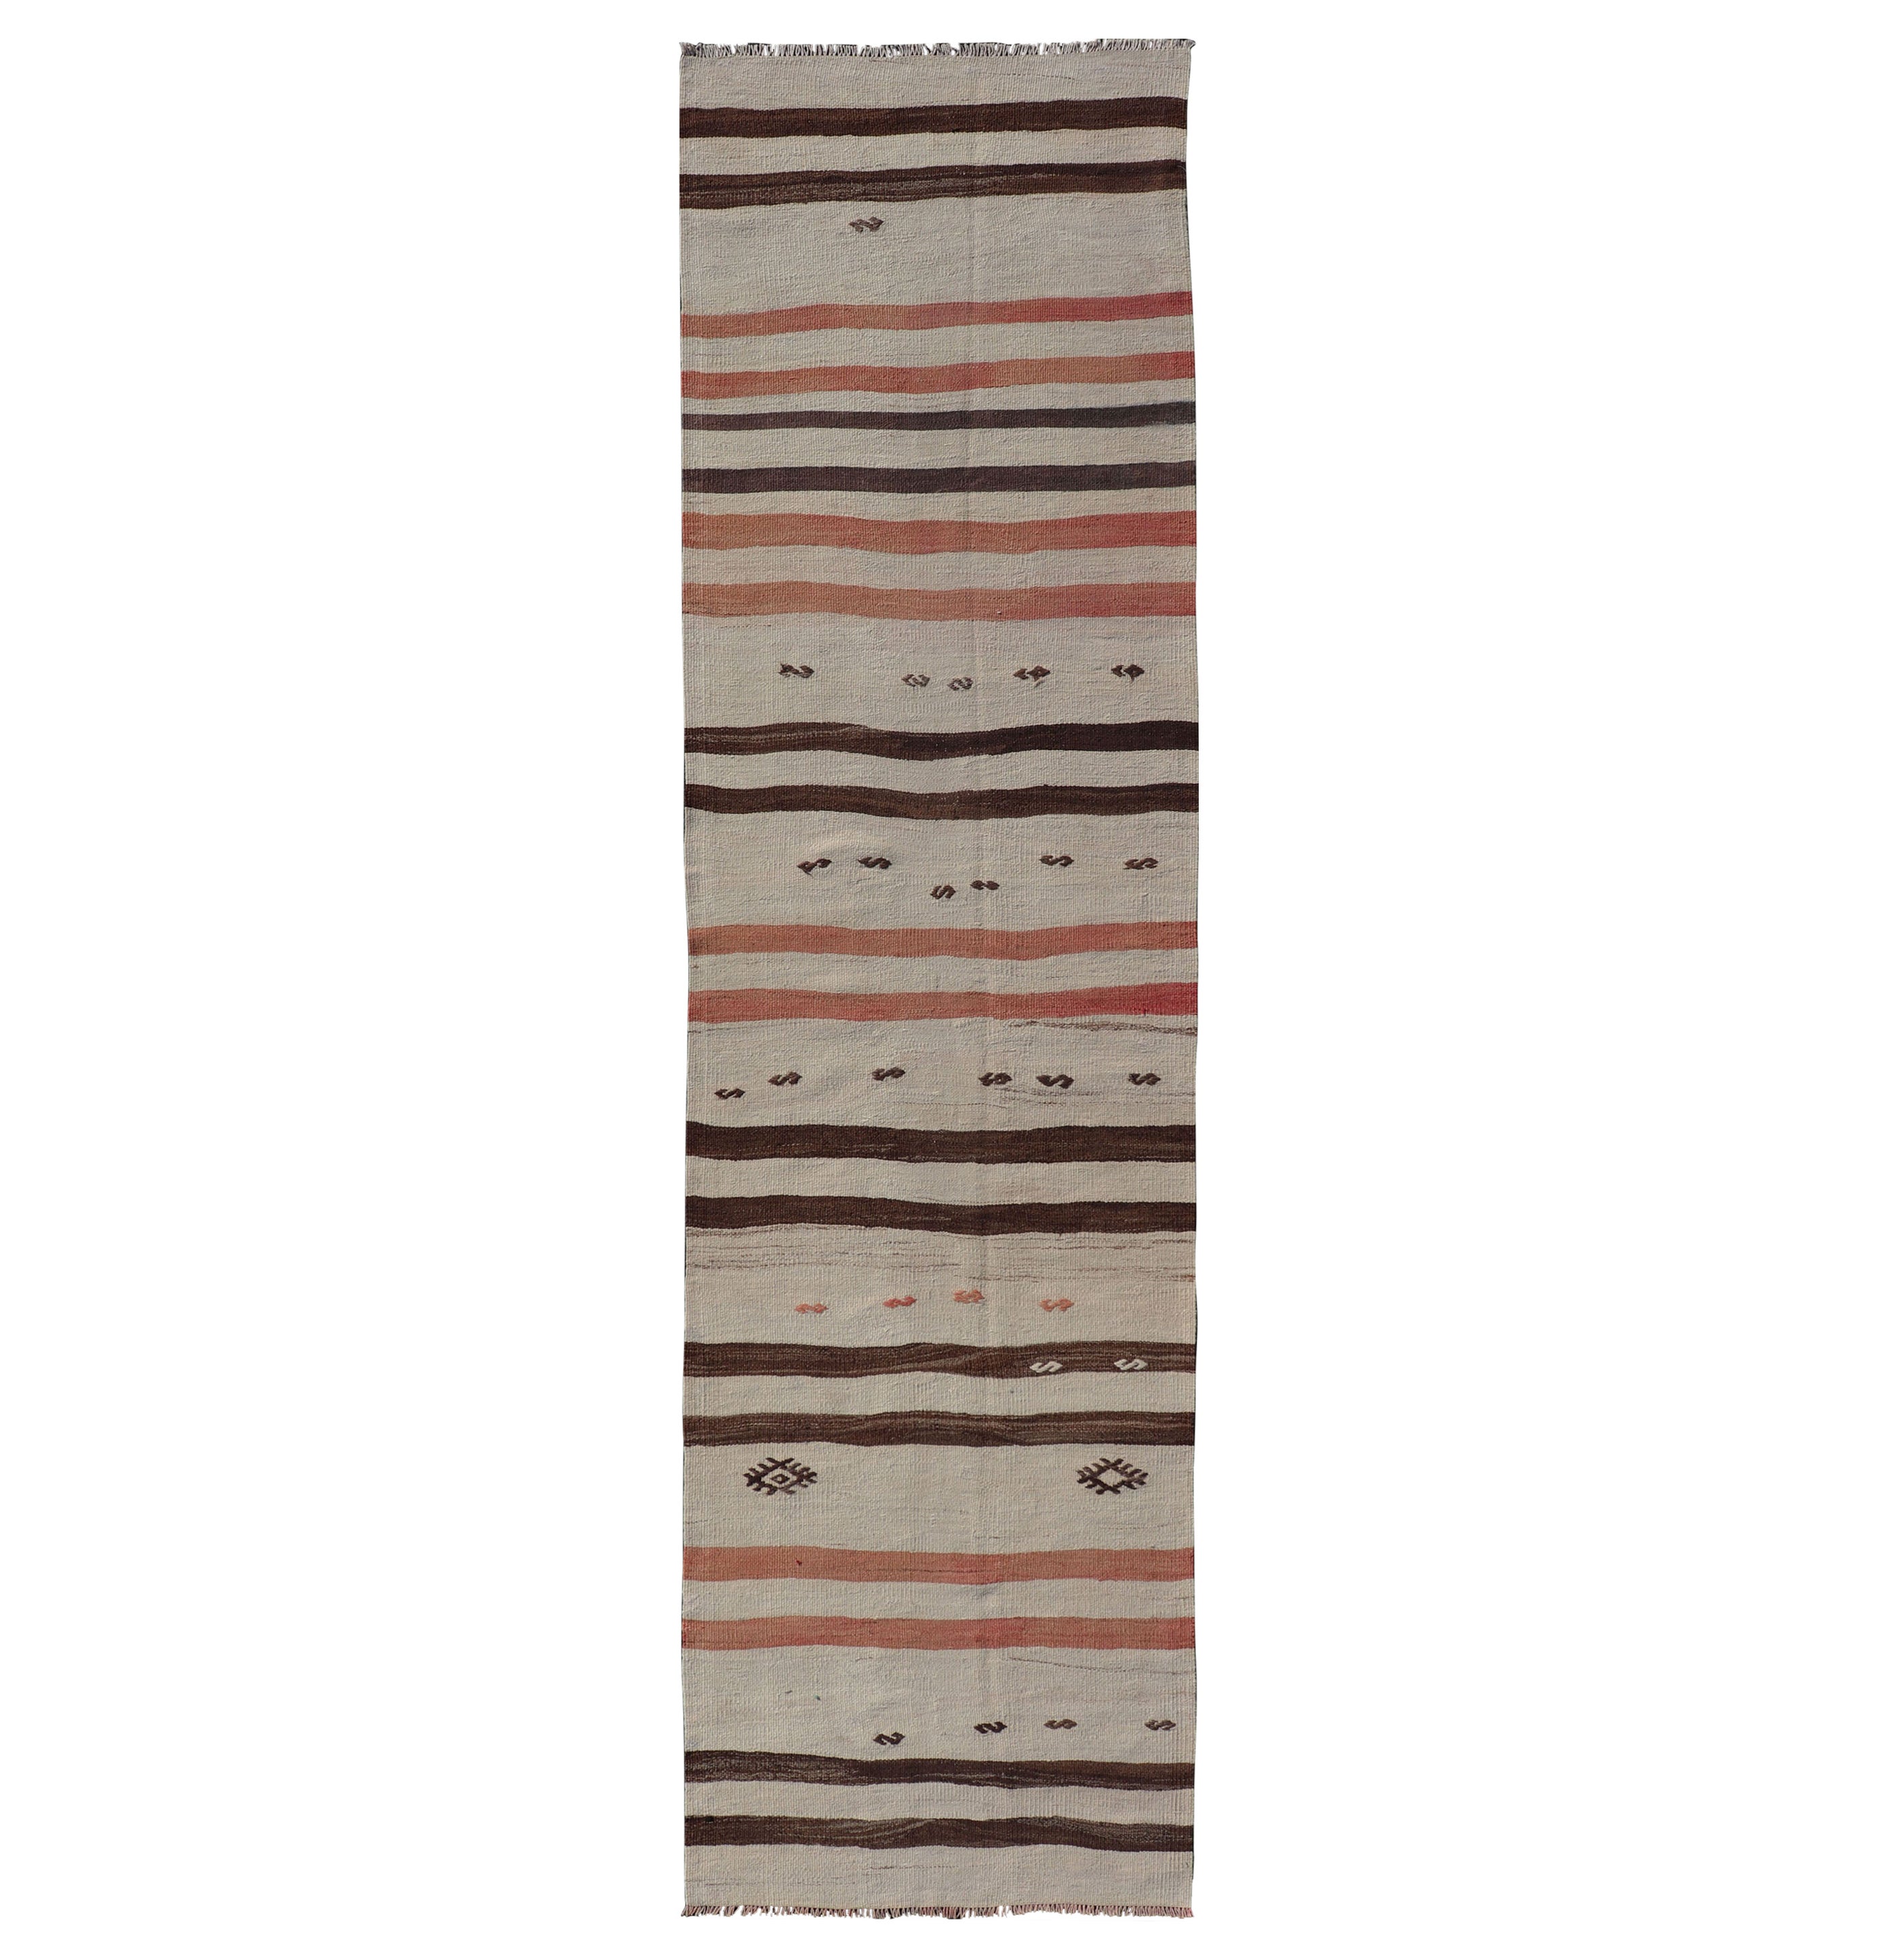 Vintage Turkish Kilim Runner with Stripes in Cream, Brown & Soft Coral Color